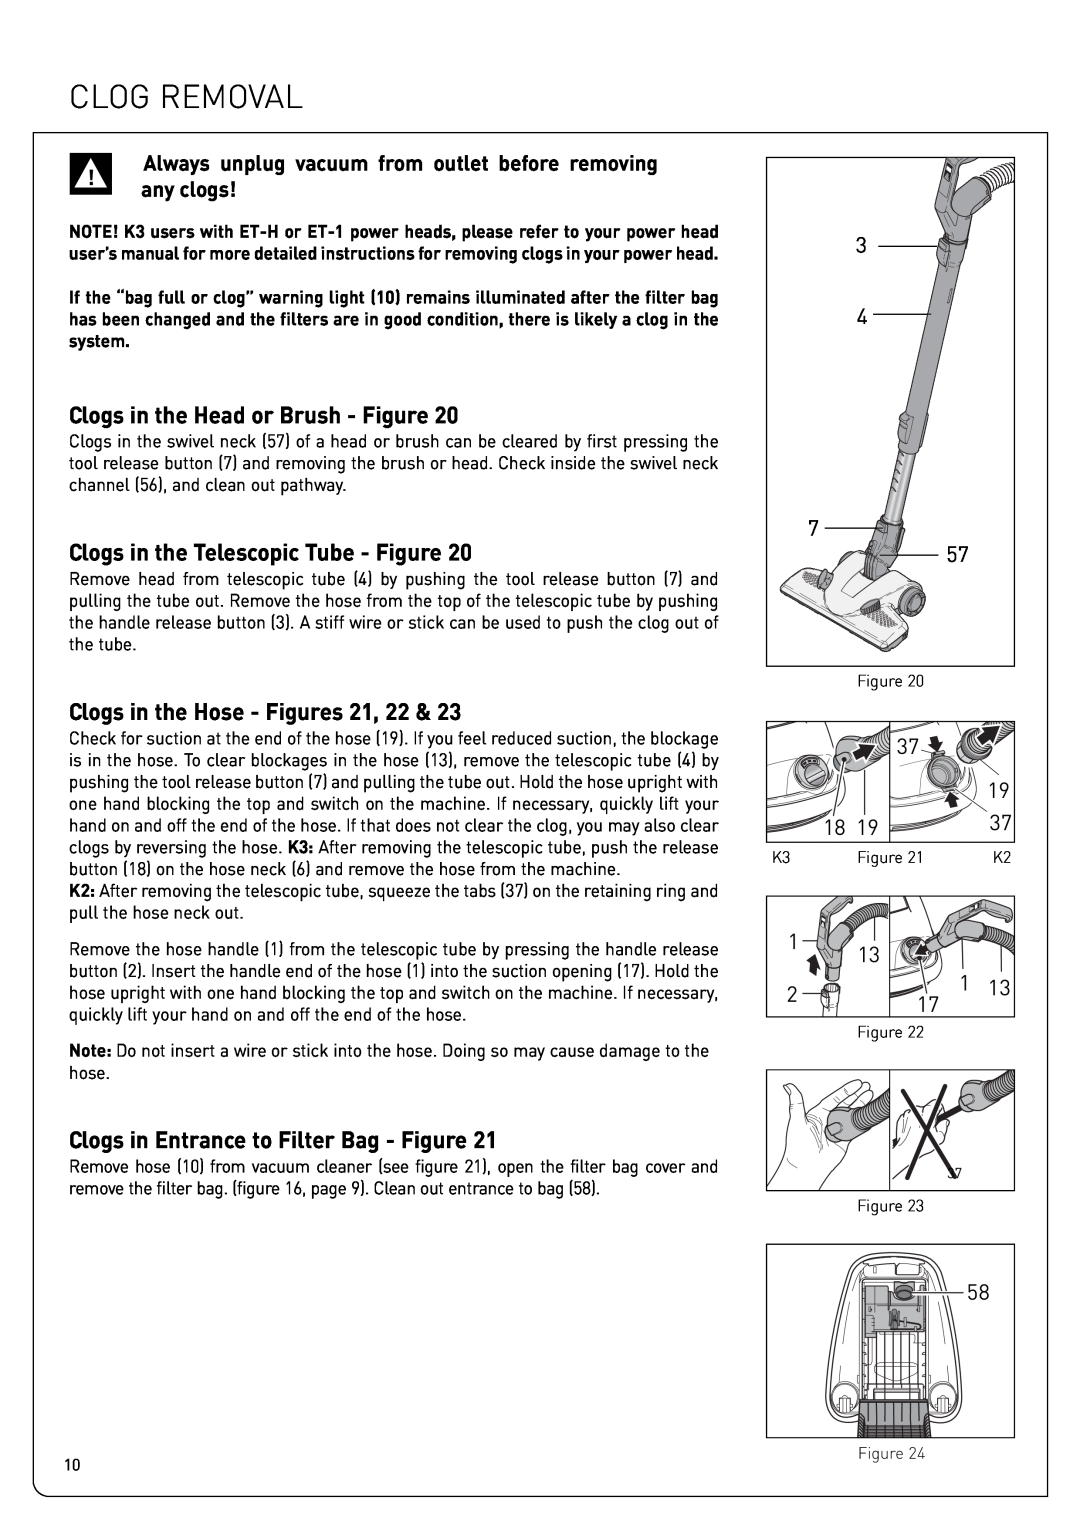 Sebo K owner manual Clog Removal, Clogs in the Head or Brush - Figure, Clogs in the Telescopic Tube - Figure, any clogs 